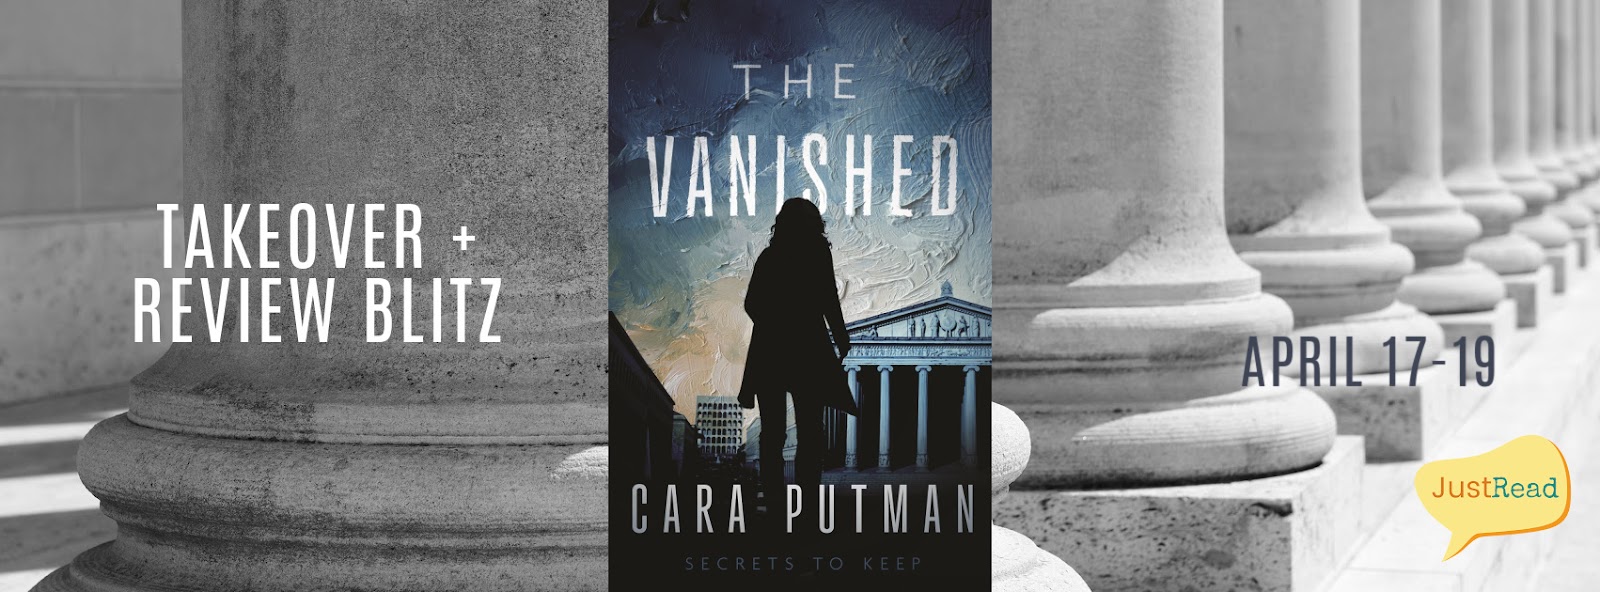 The Vanished JustRead Takeover + Review Blitz